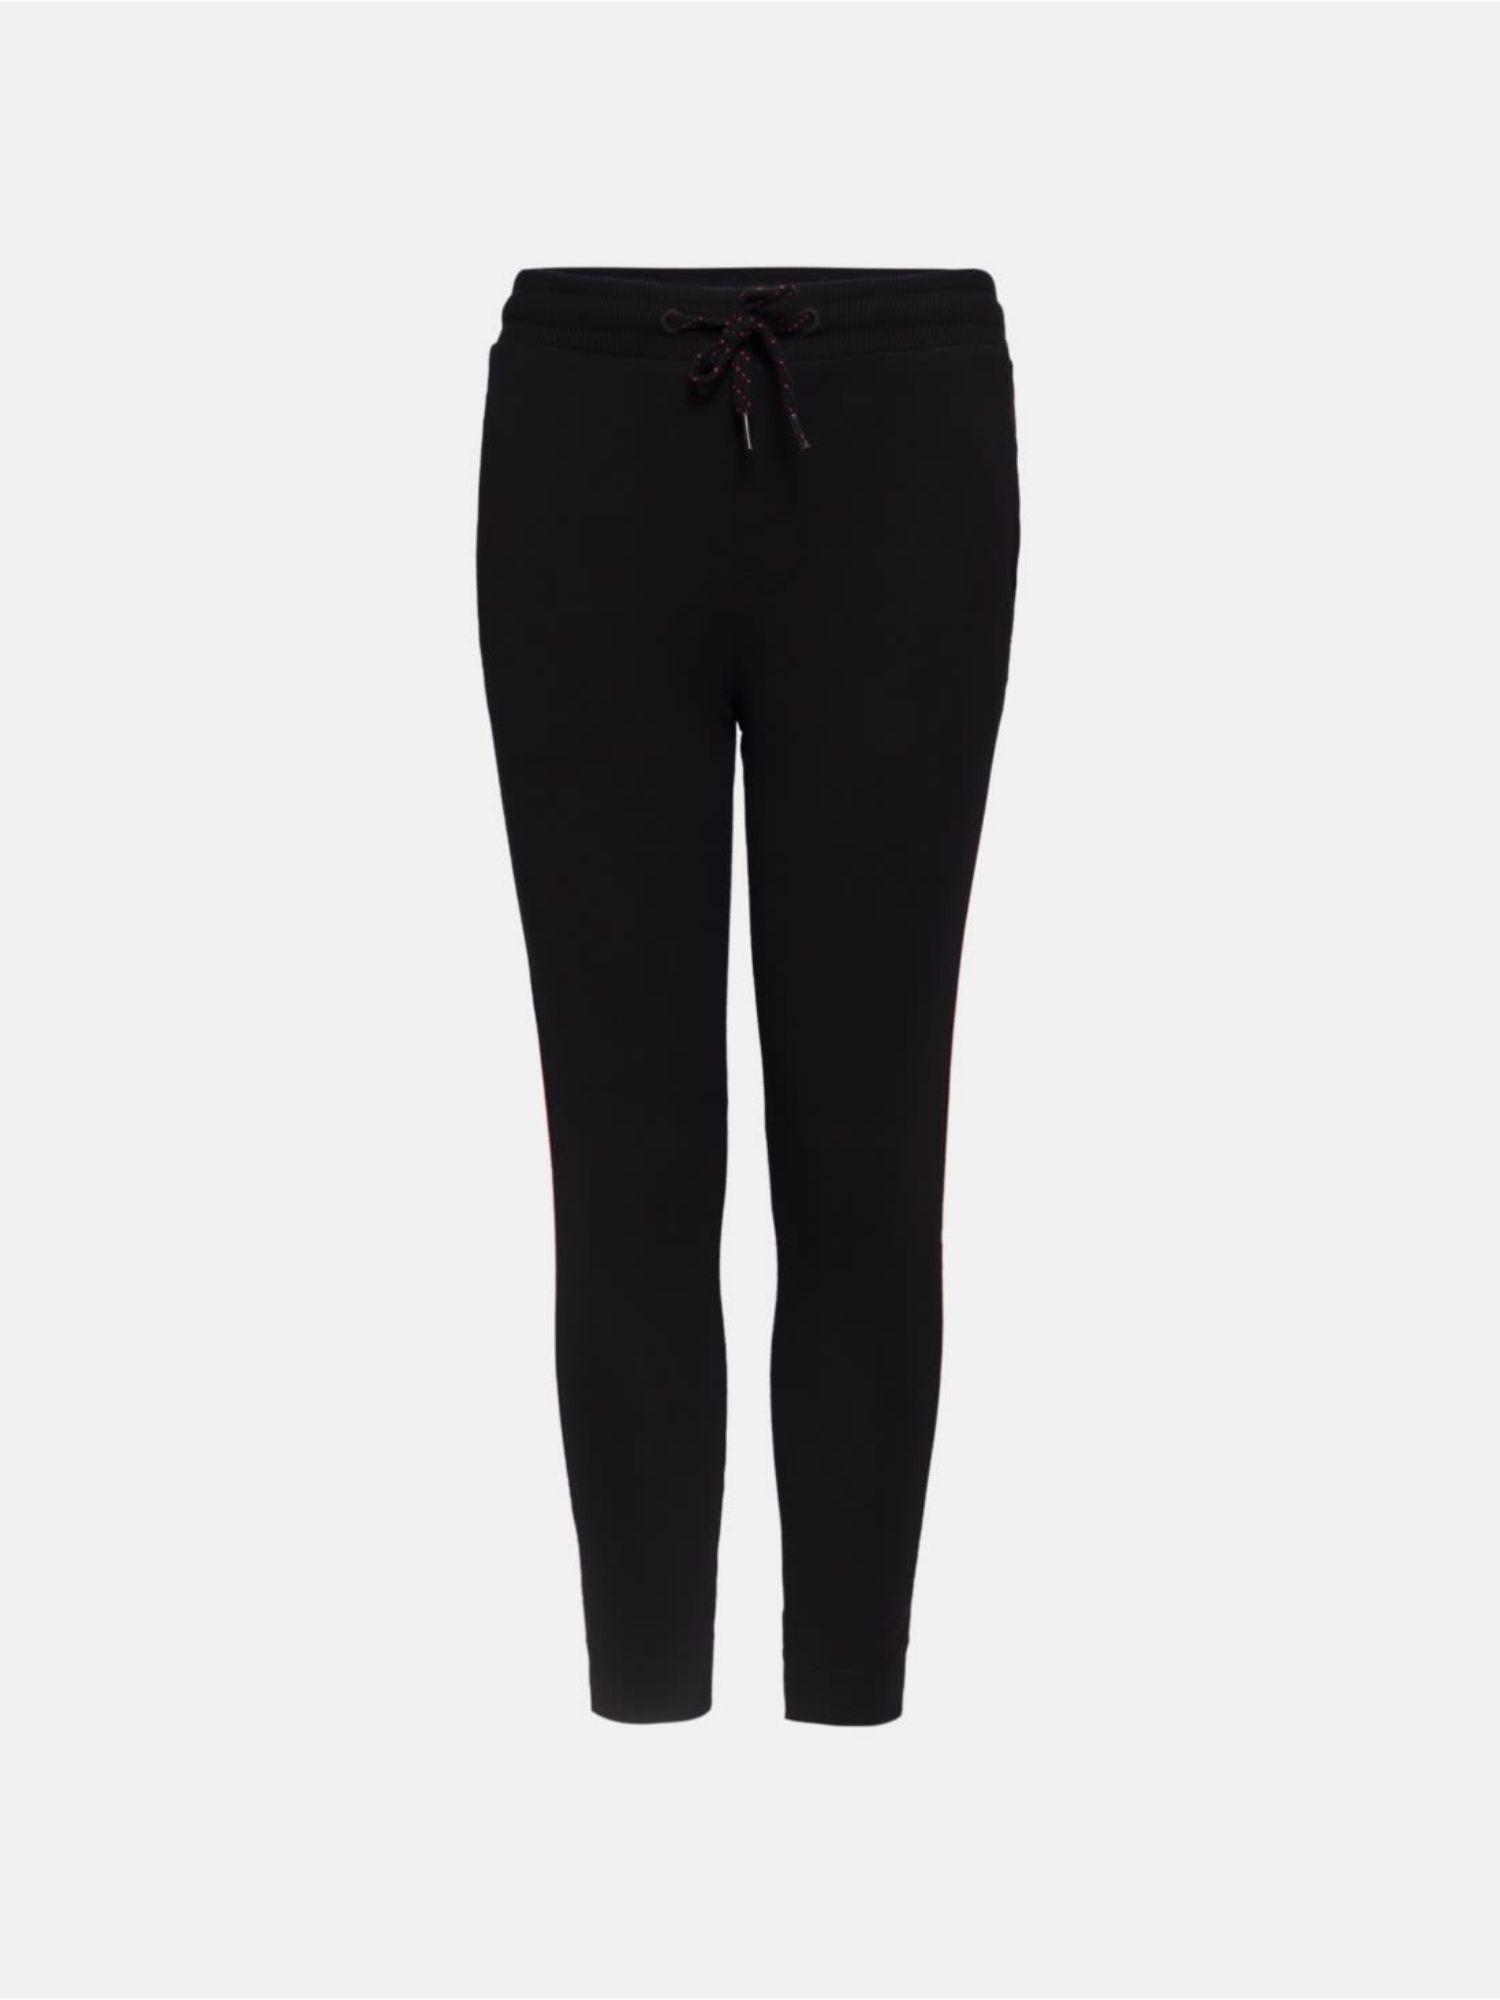 black track pant - style number - (ab31)